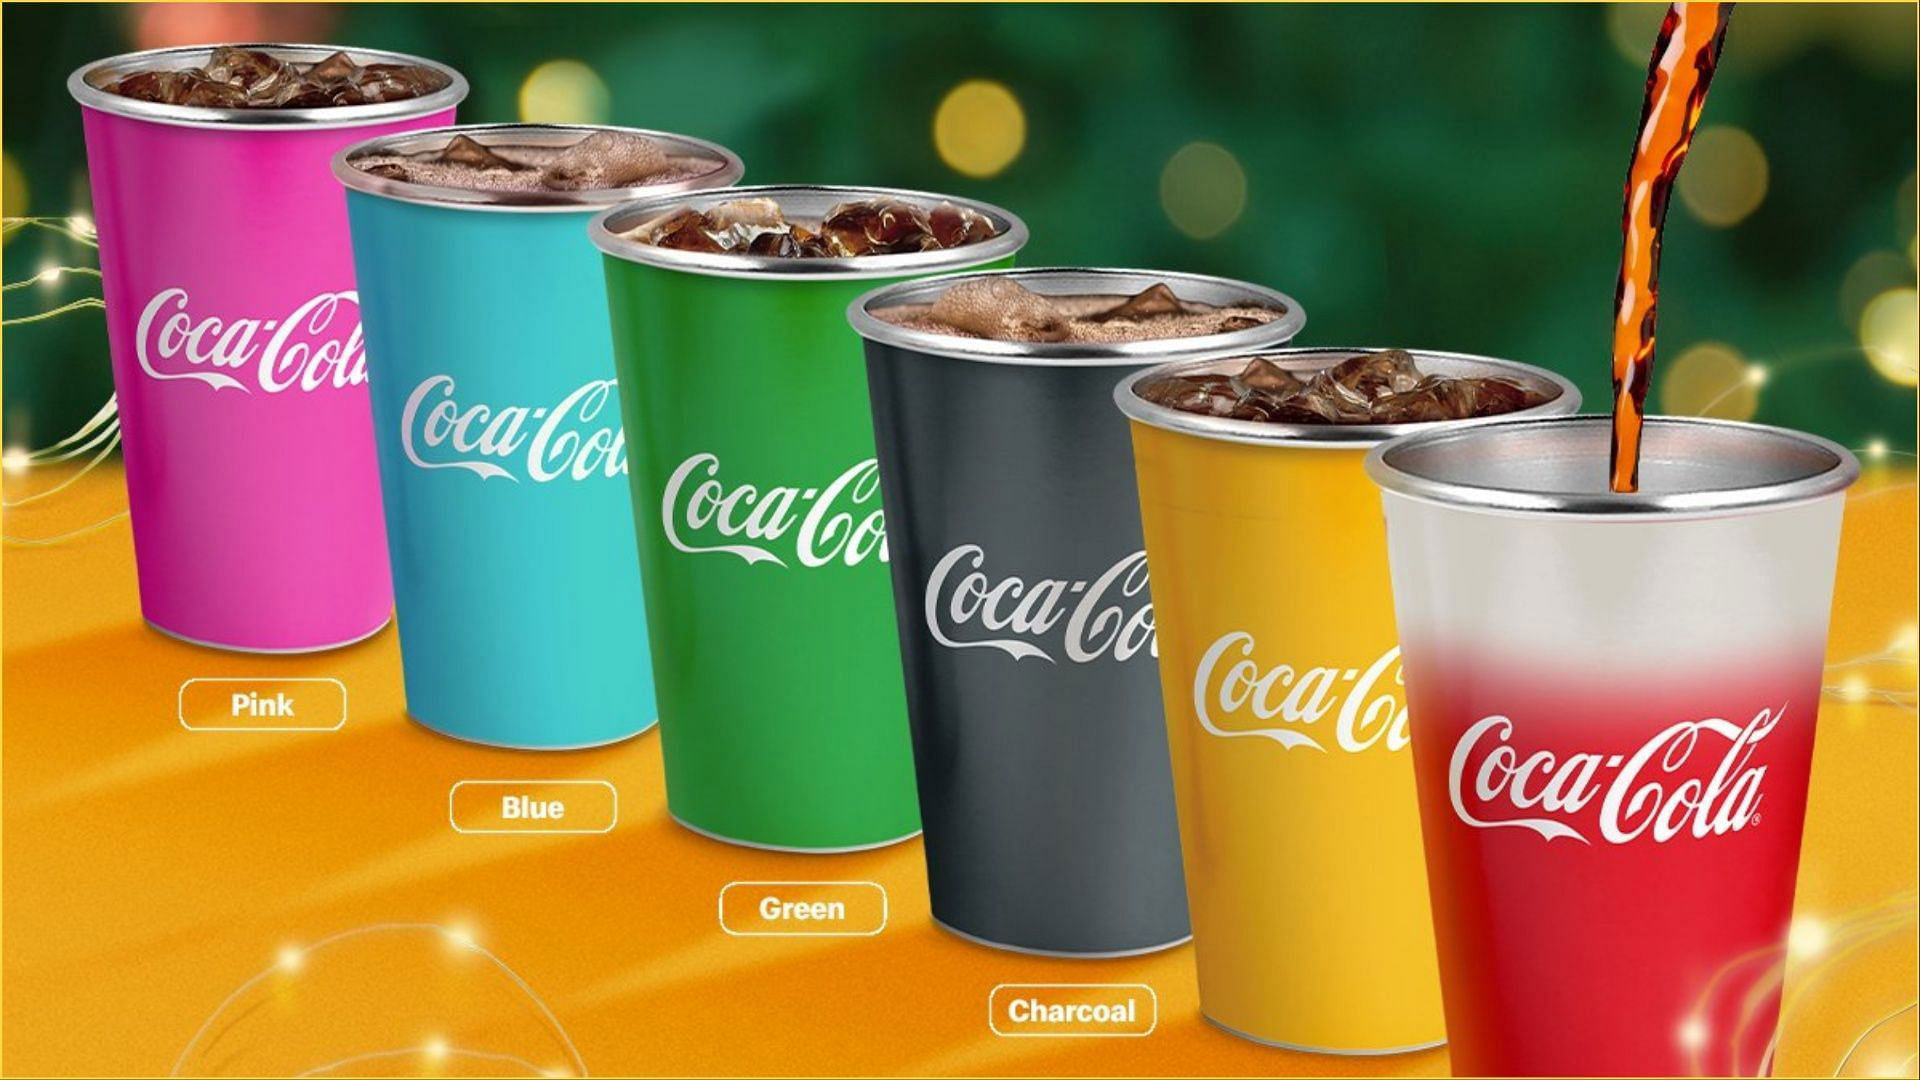 Are the new McDonald's CocaCola Color Changing cups available only in